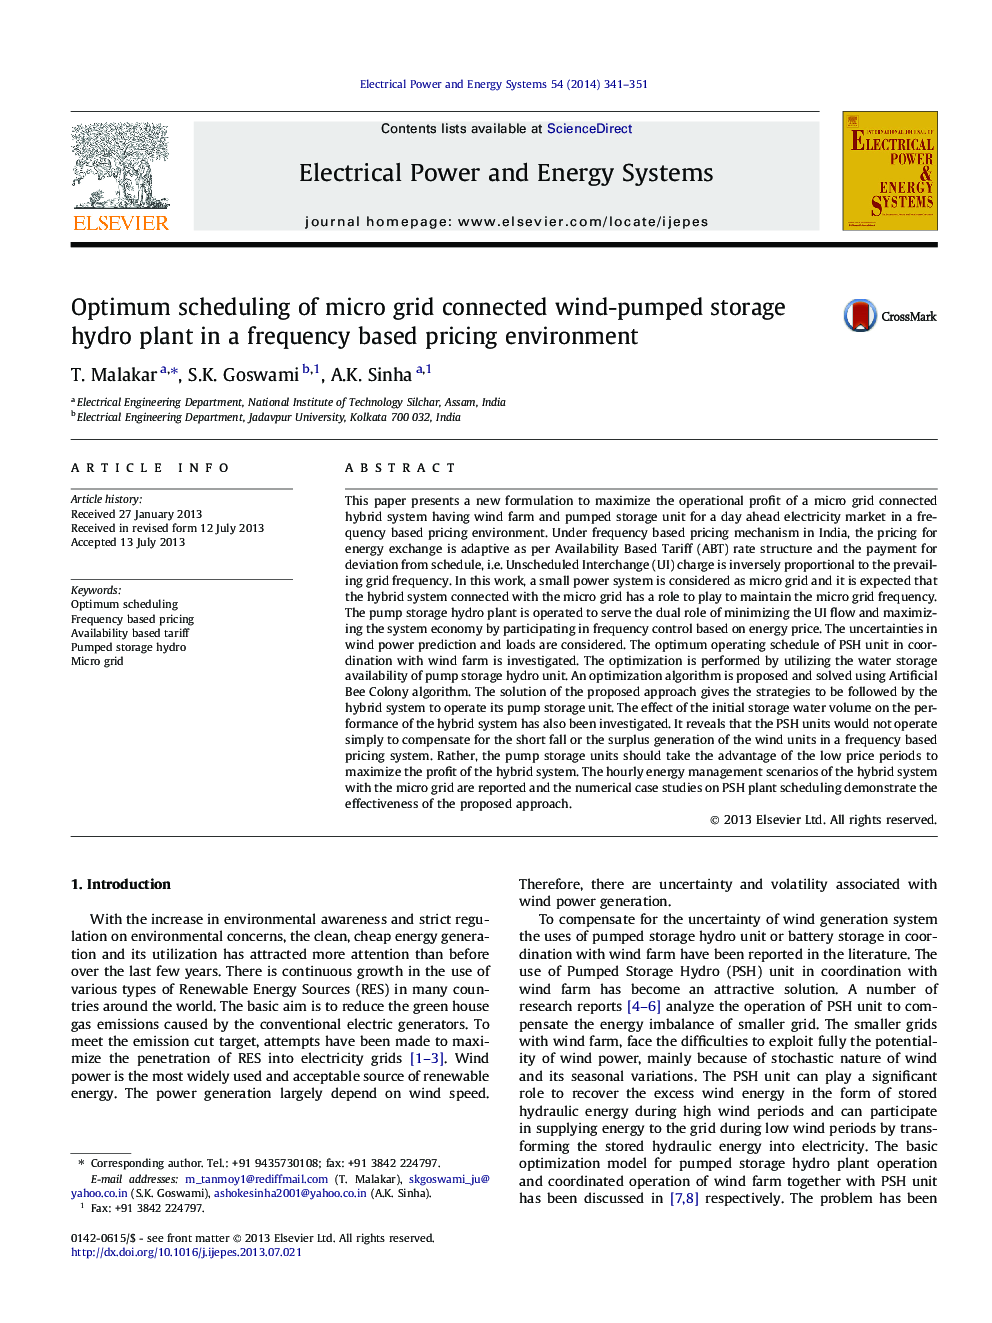 Optimum scheduling of micro grid connected wind-pumped storage hydro plant in a frequency based pricing environment